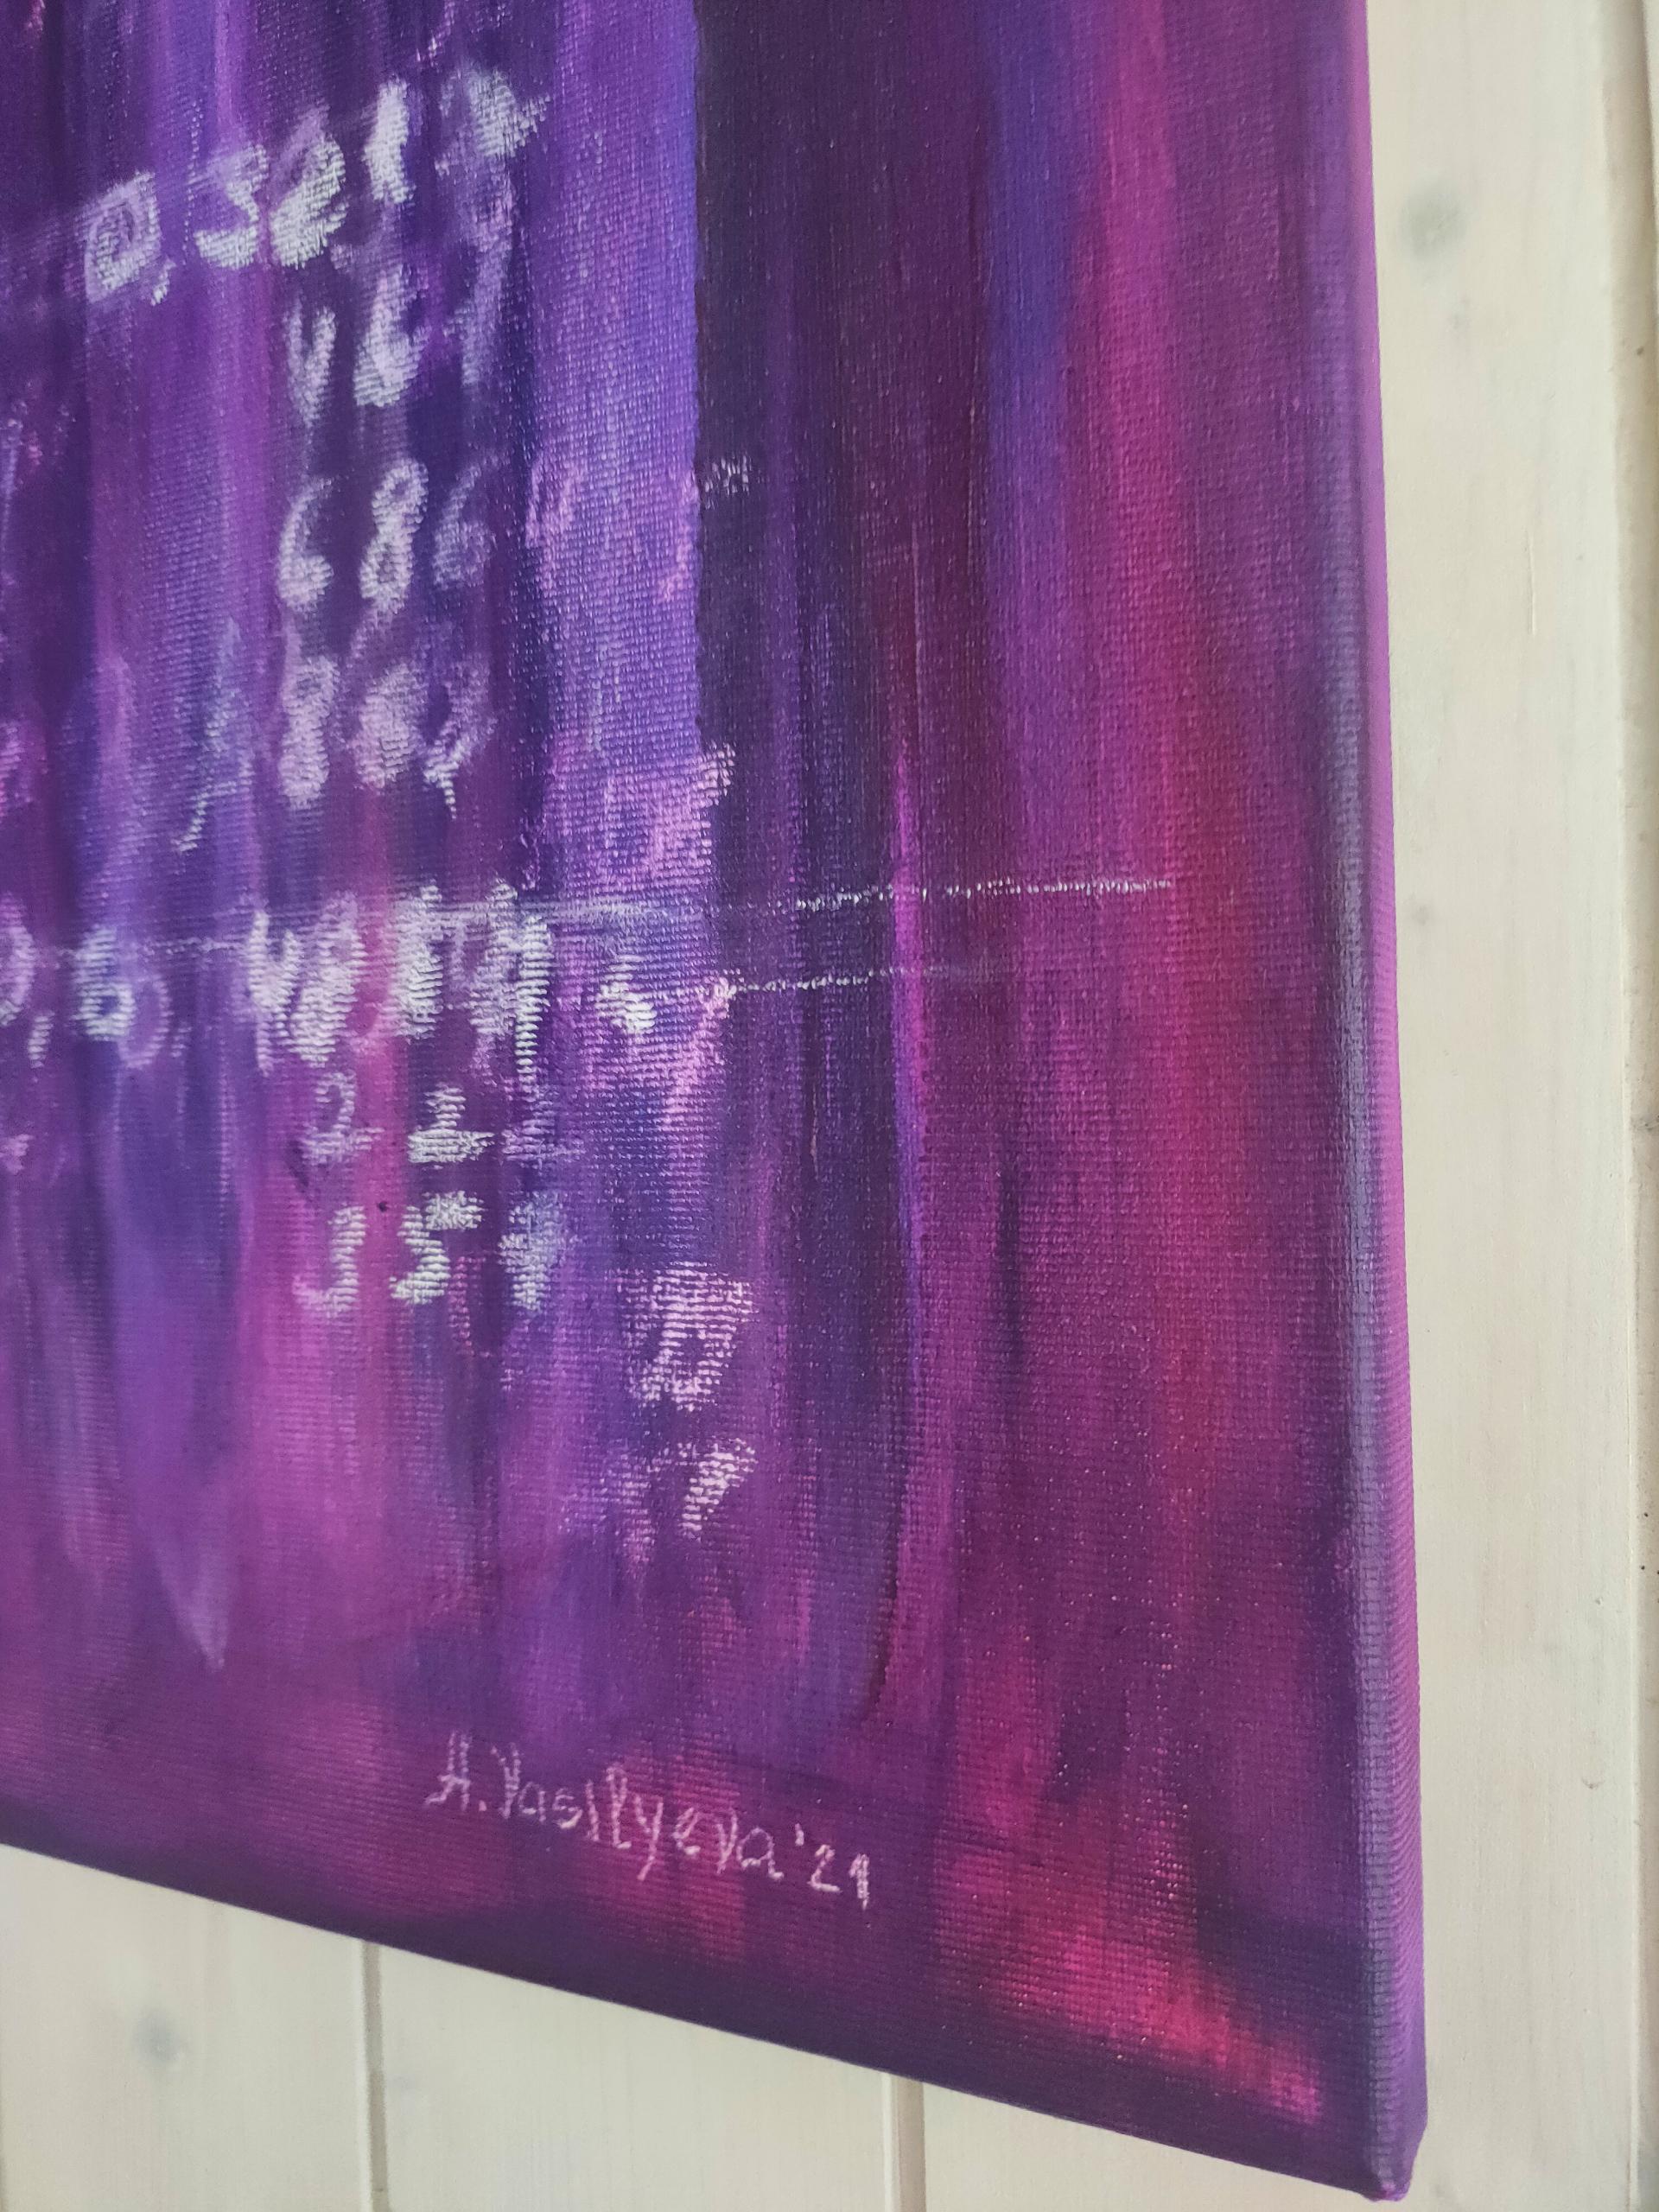 This painting was presented in Zurich during the SWISS Art Expo 2021.
New Science Artwork with numbers in violet, purple, and lilac colors.
60x60x1.8cm; The painting is ready to hang and will be shipped from the artist's studio in